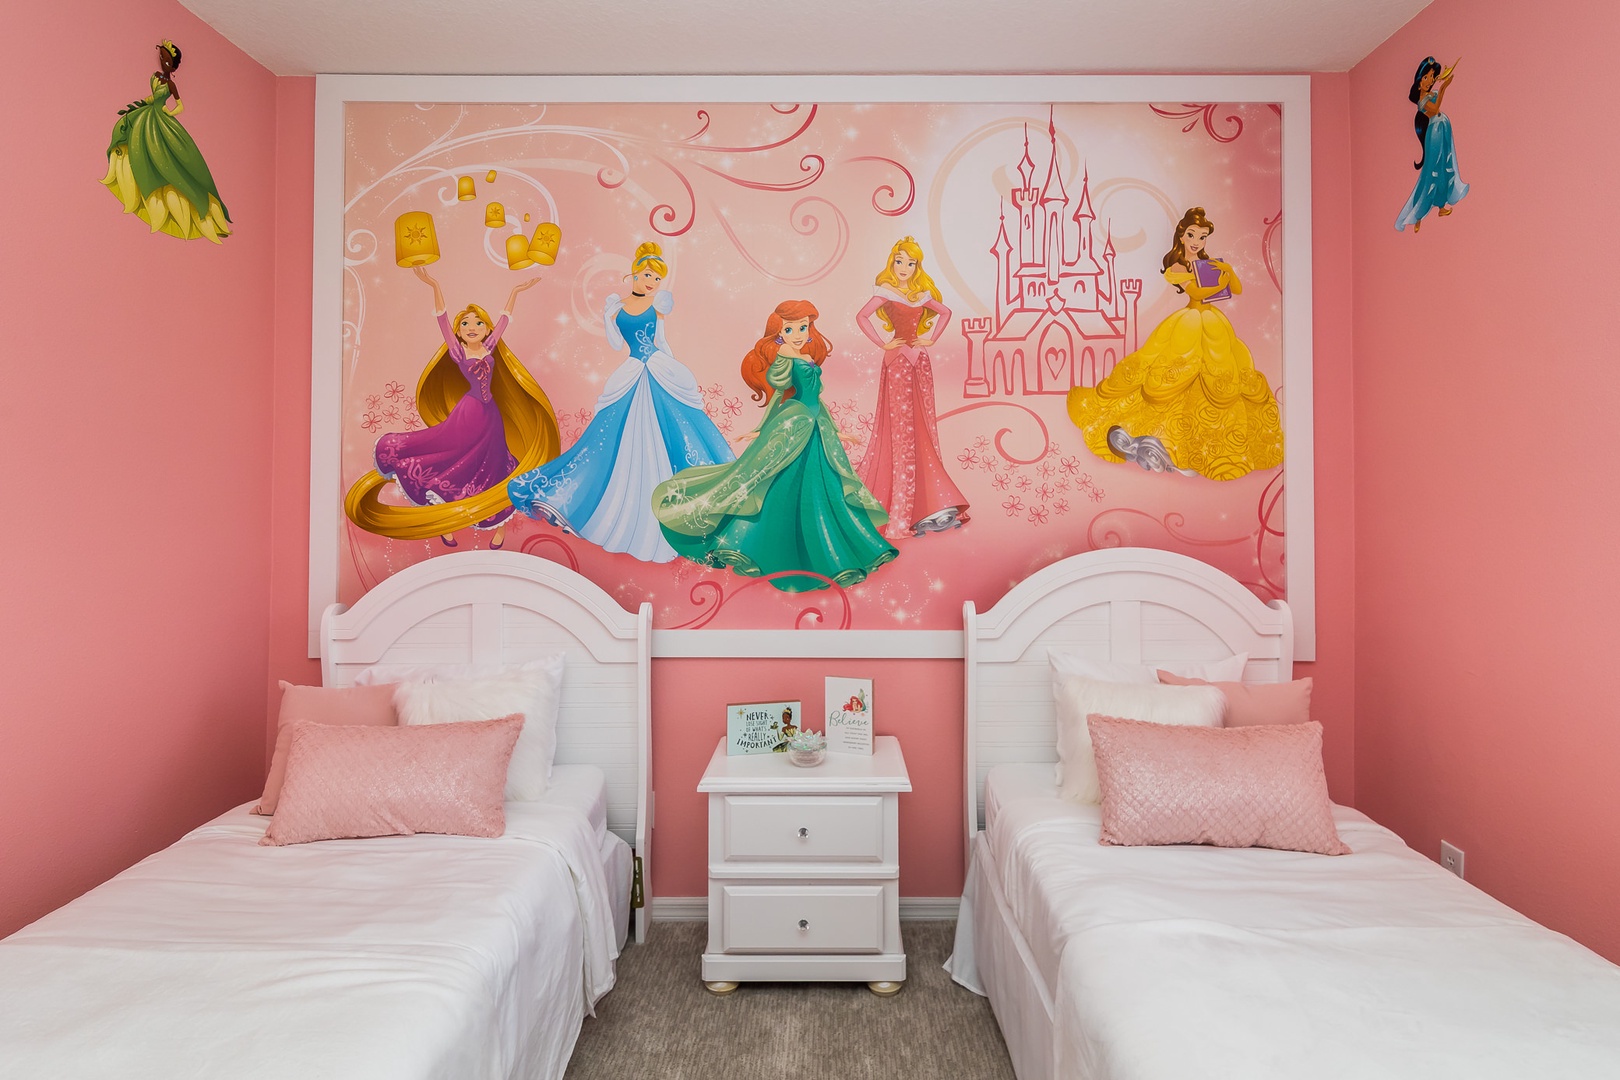 Bedroom 3 Princess themed with 2 Twin beds, and TV (2nd floor)